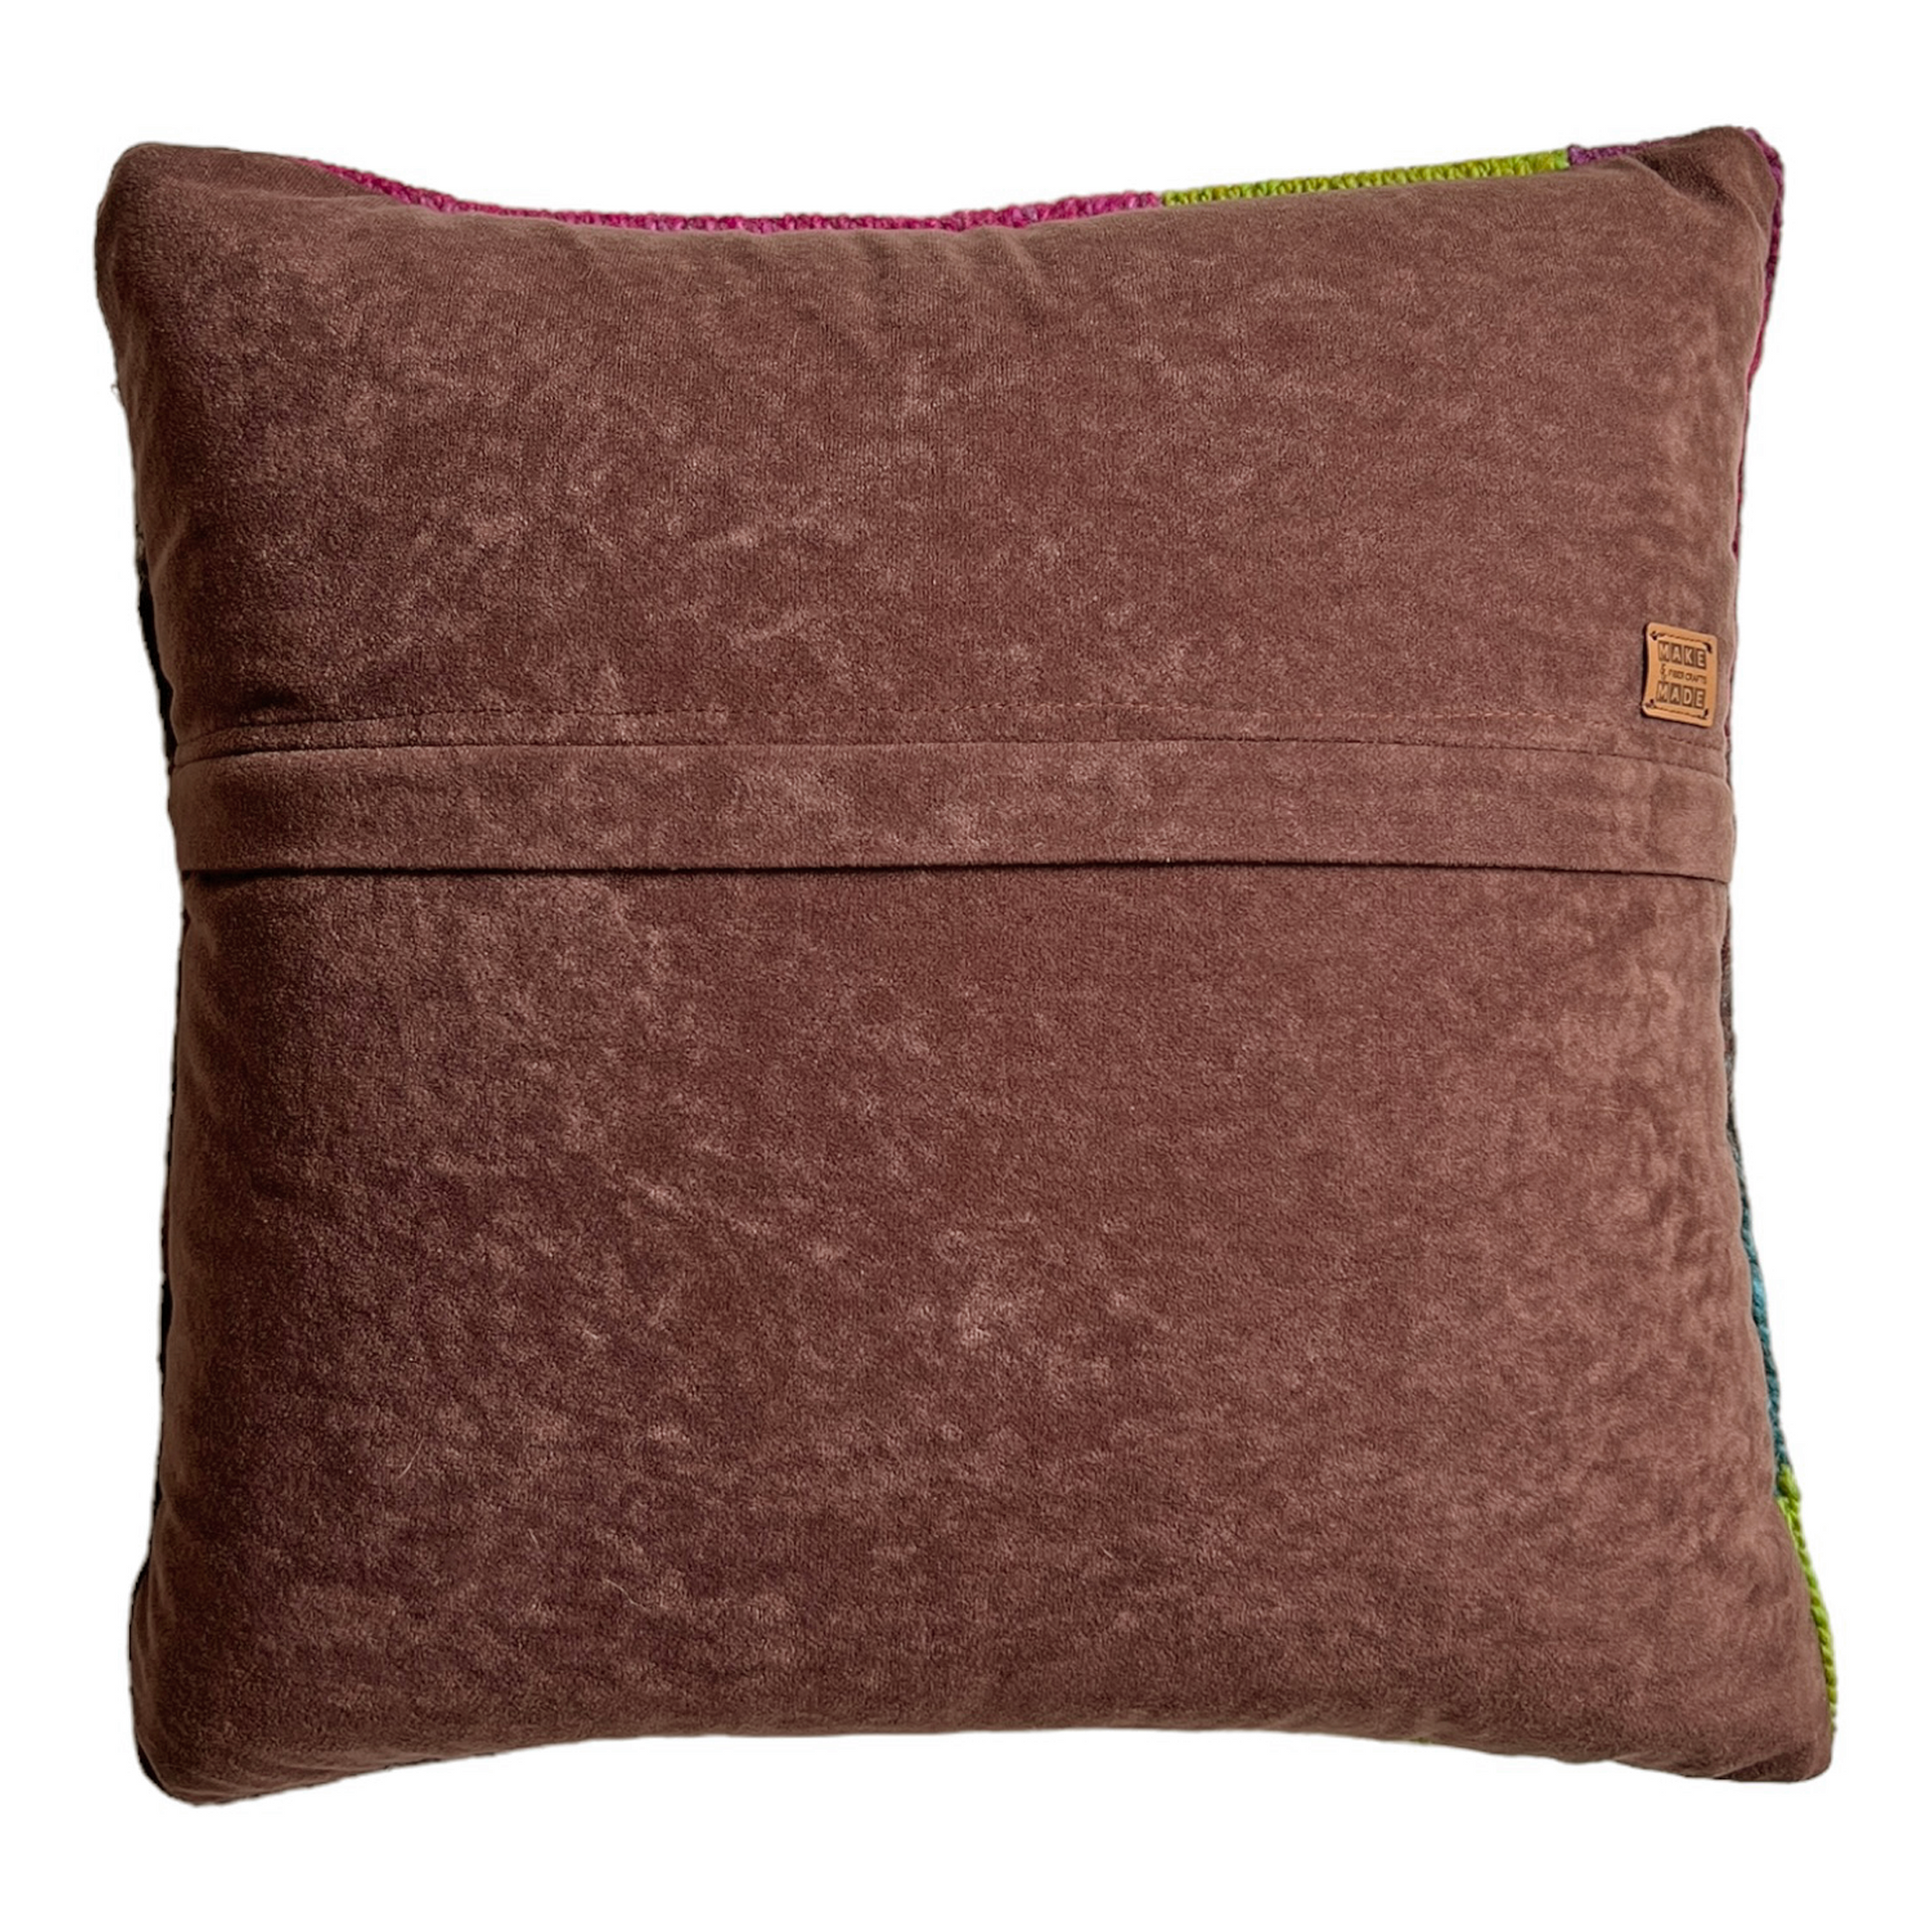 The back side of this pillow is a rich, chocolate-colored faux suede. A hidden zipper runs horizontally through the middle of the pillow and includes a leather Make & Made Fiber Crafts label.